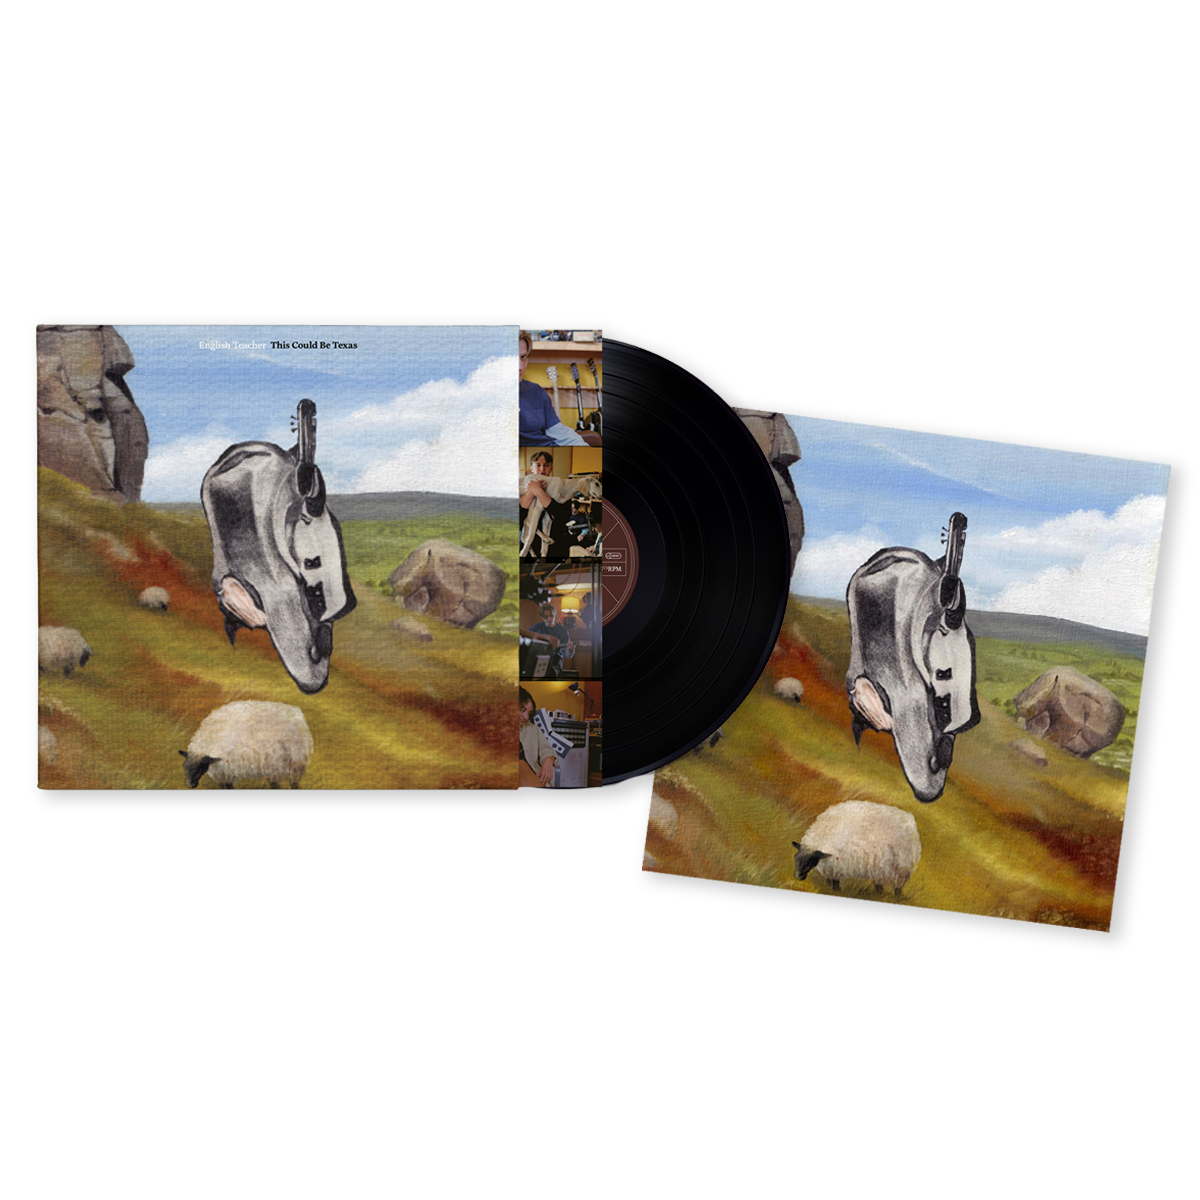 This Could be Texas: Vinyl LP + Signed Art Card